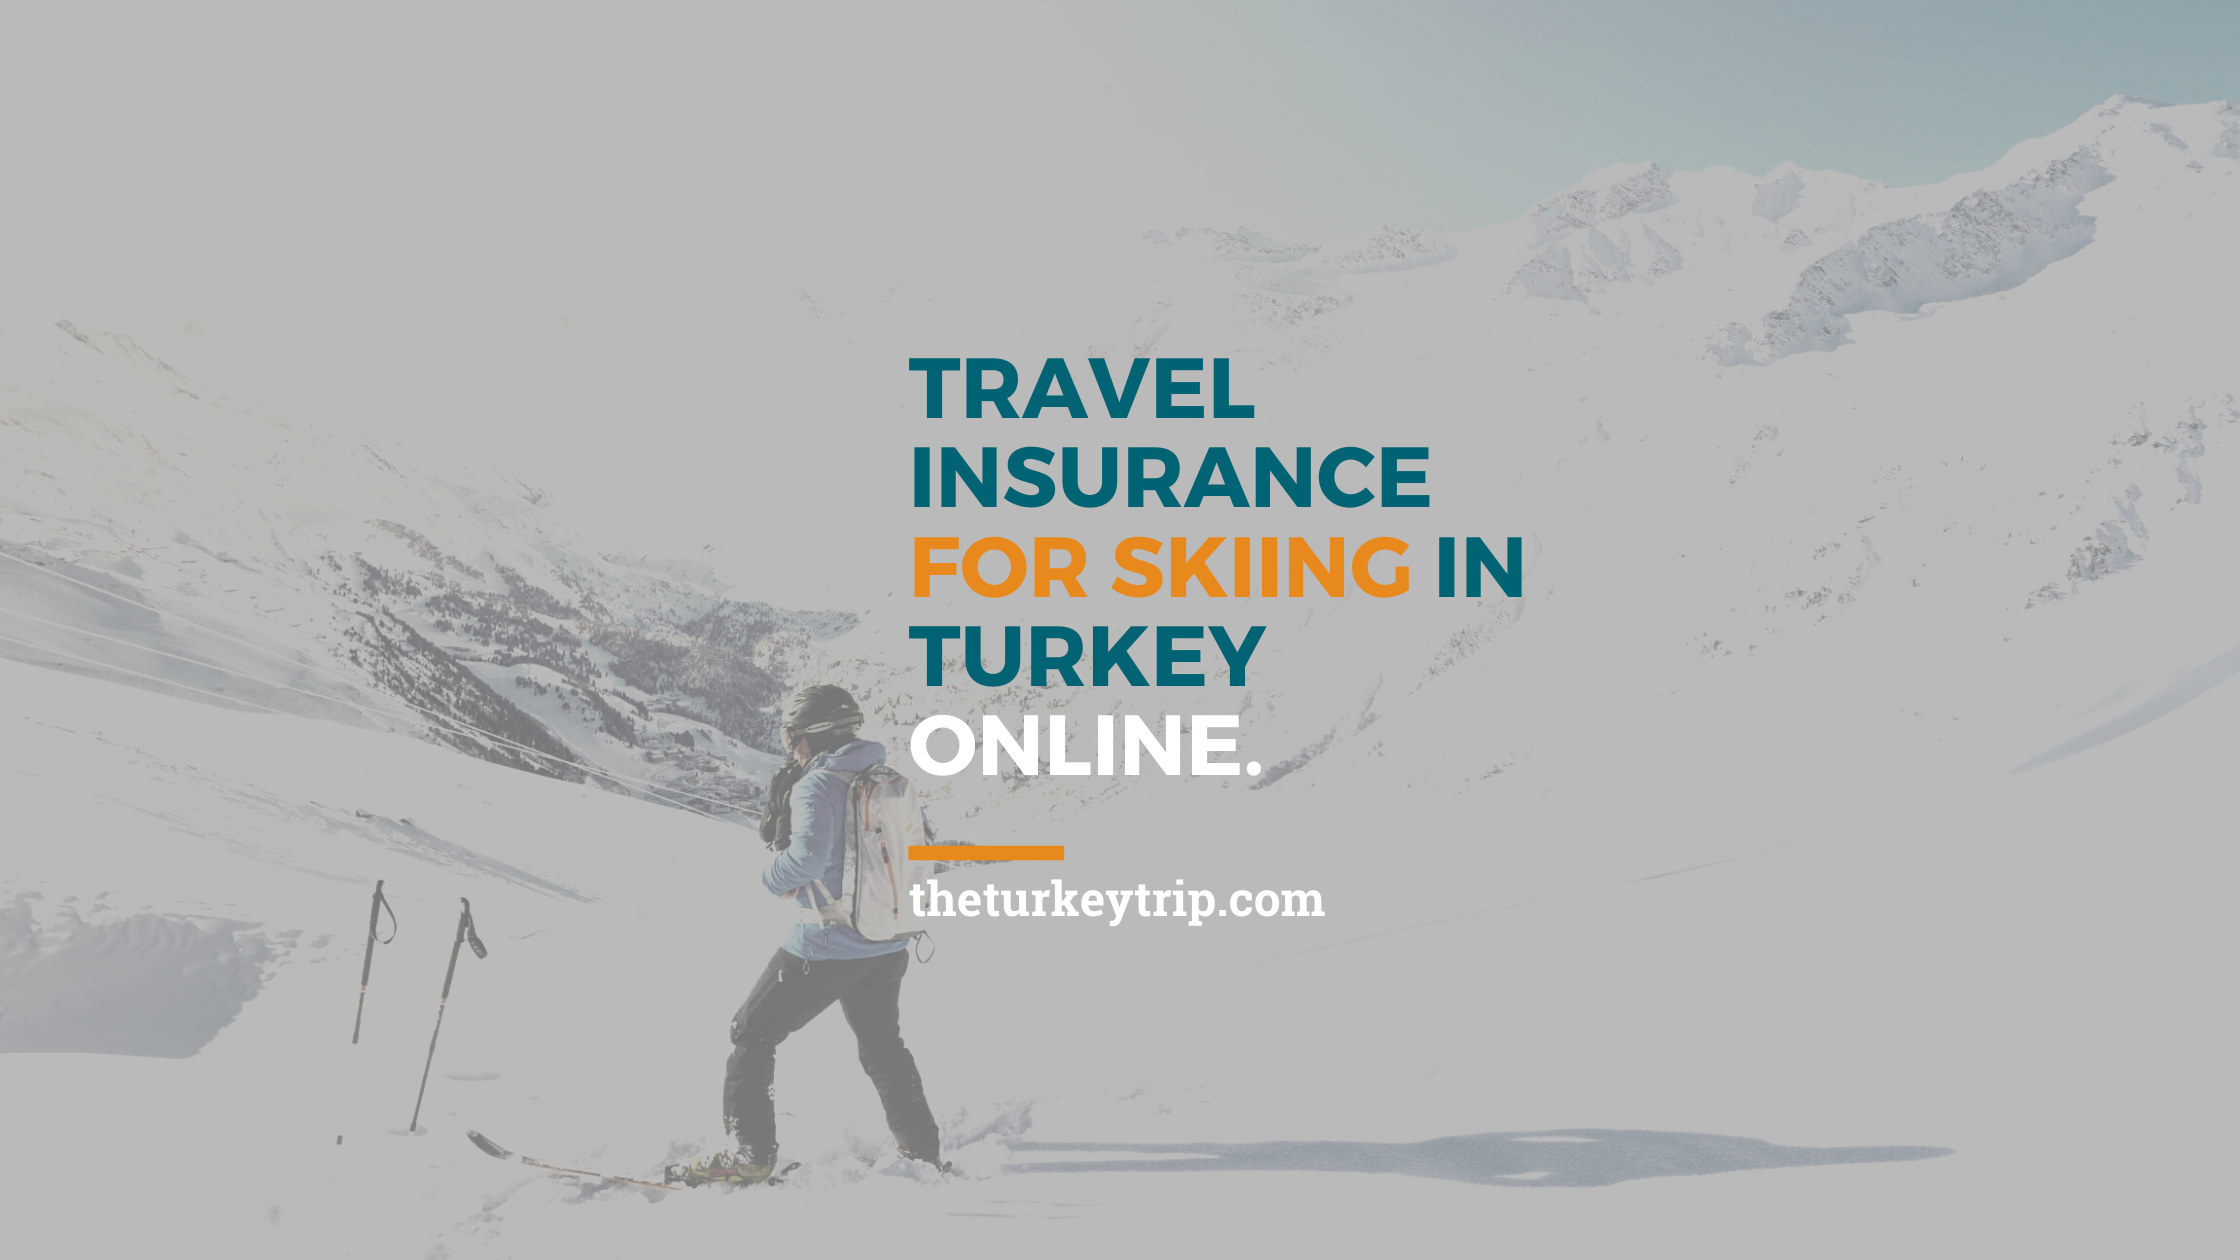 Travel Insurance For Skiing In Turkey Online